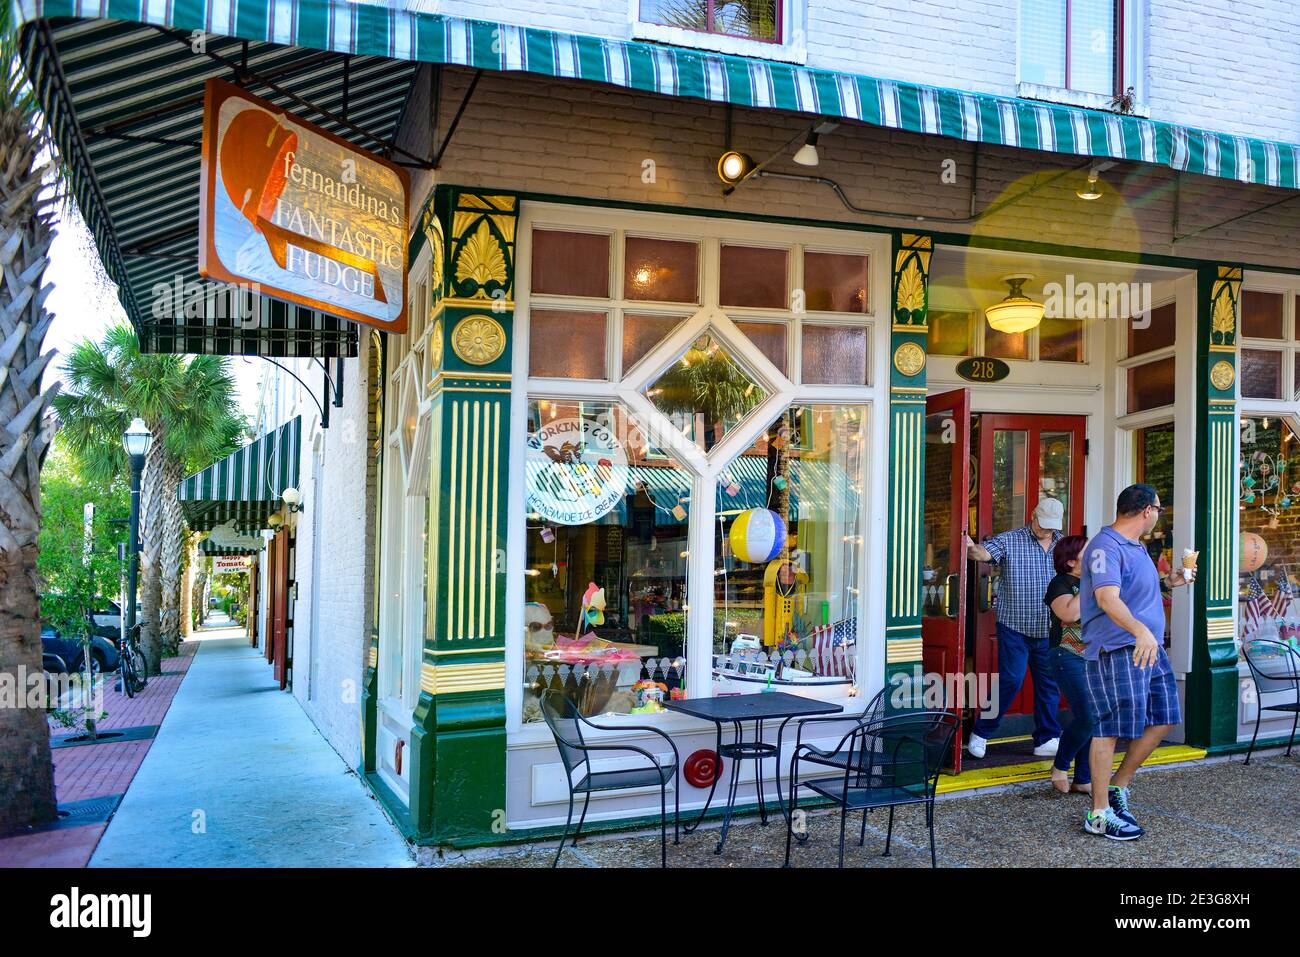 People leaving with ice cream cones from a charming little shop, Fernandina's Fantastic Fudge store on Centre Street in Fernandina Beach, on Amelia Is Stock Photo